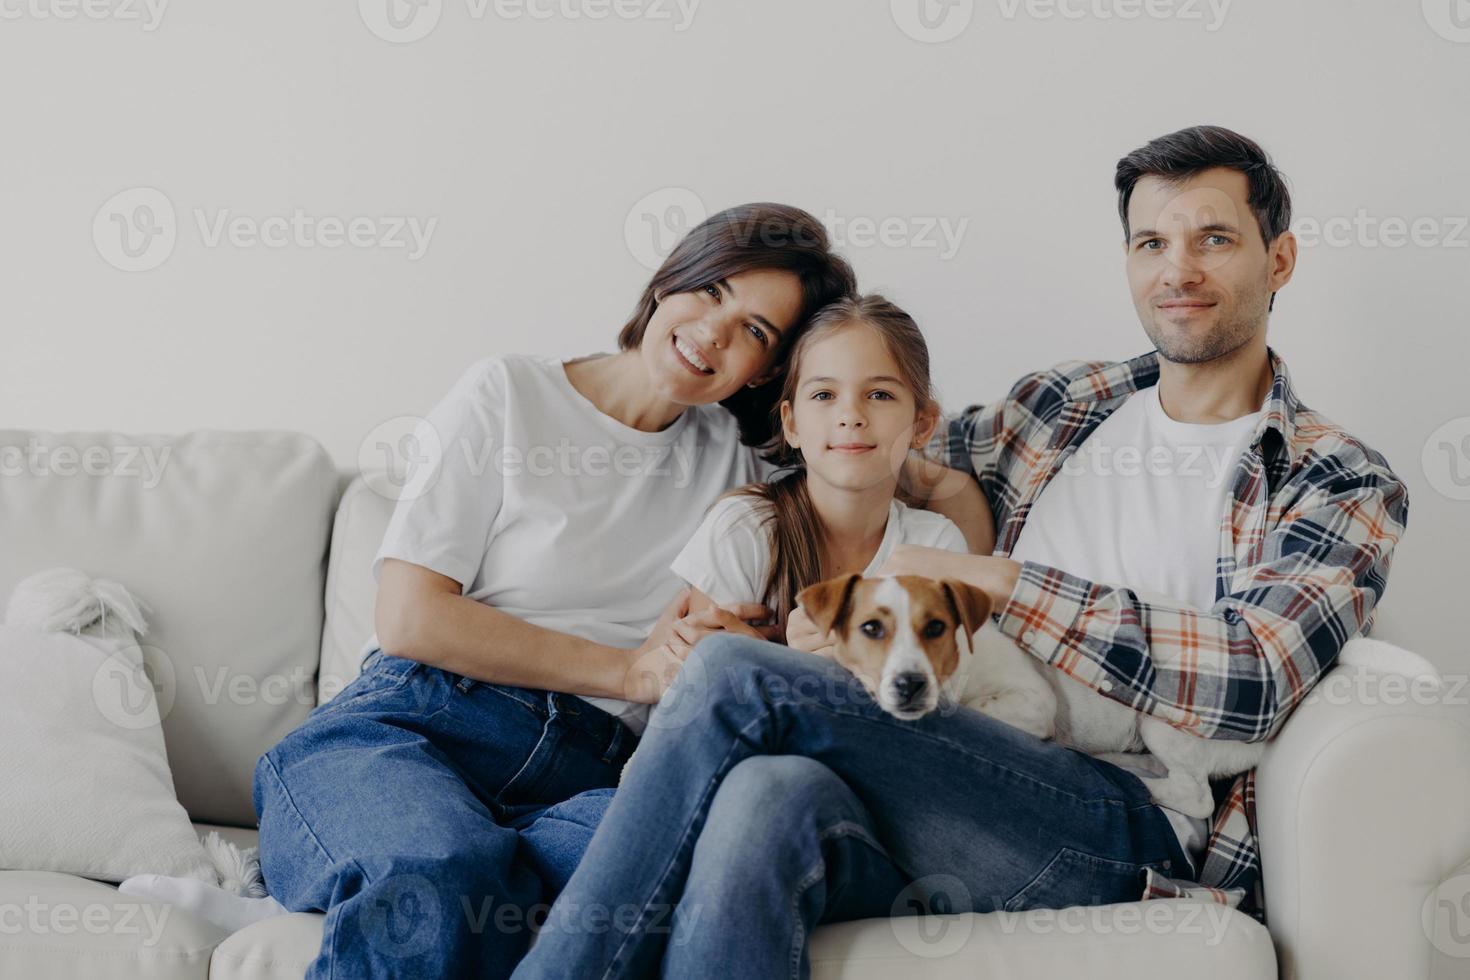 Portrait of affectionate family cuddle and sit together at couch in living room, change their home, have happy expressions. Father, mother, daughter and dog pose for making portrait, spend good time photo